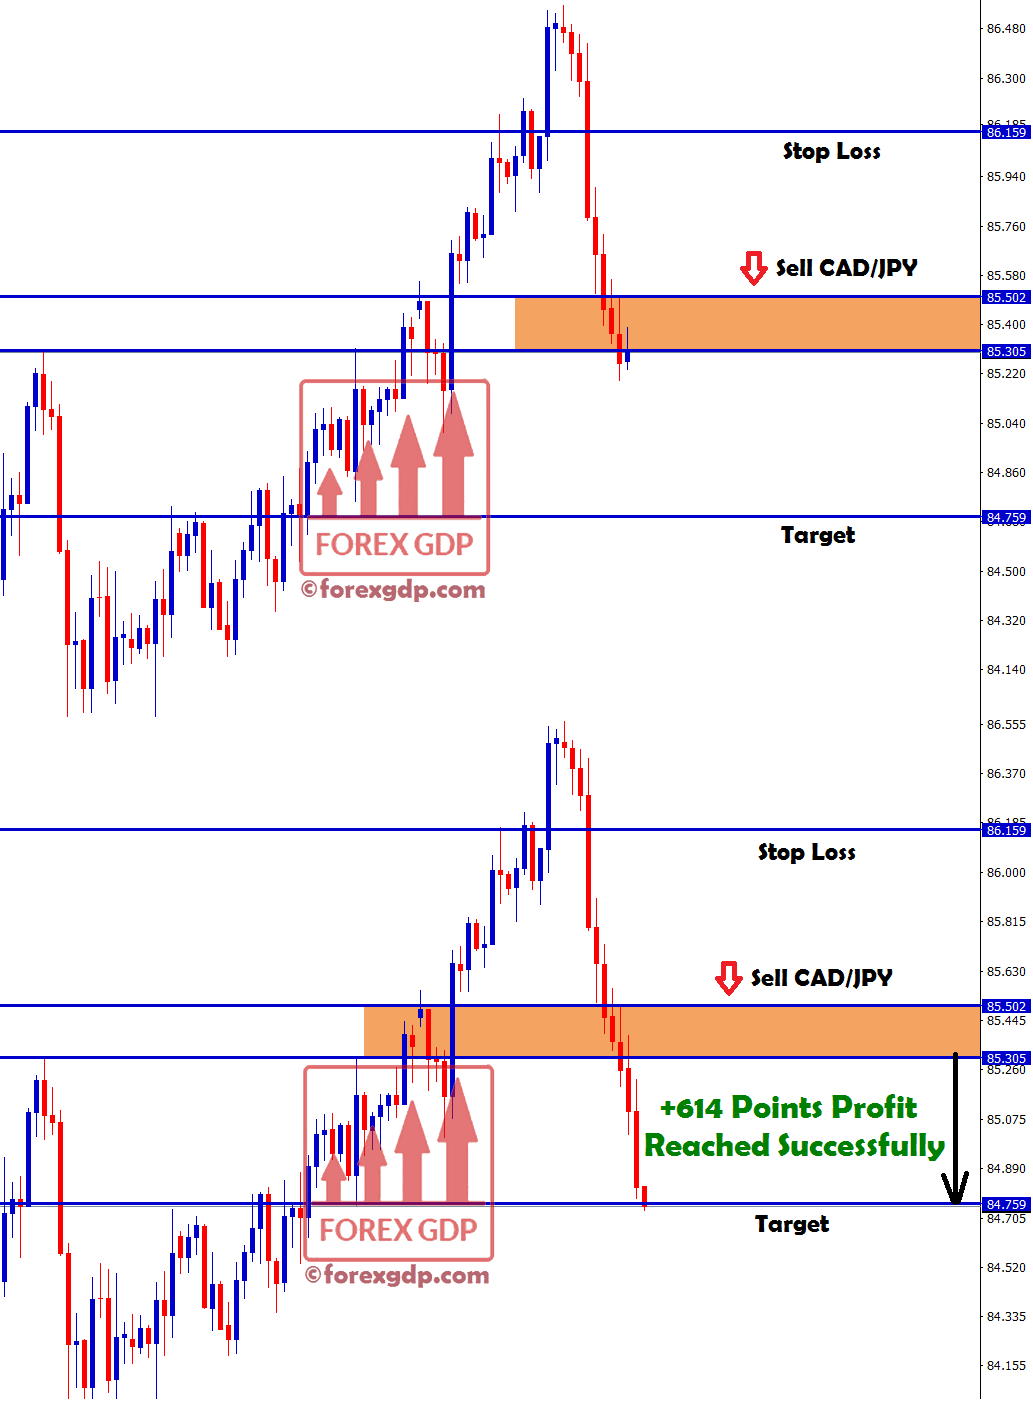 cadjpy sell signal reached target